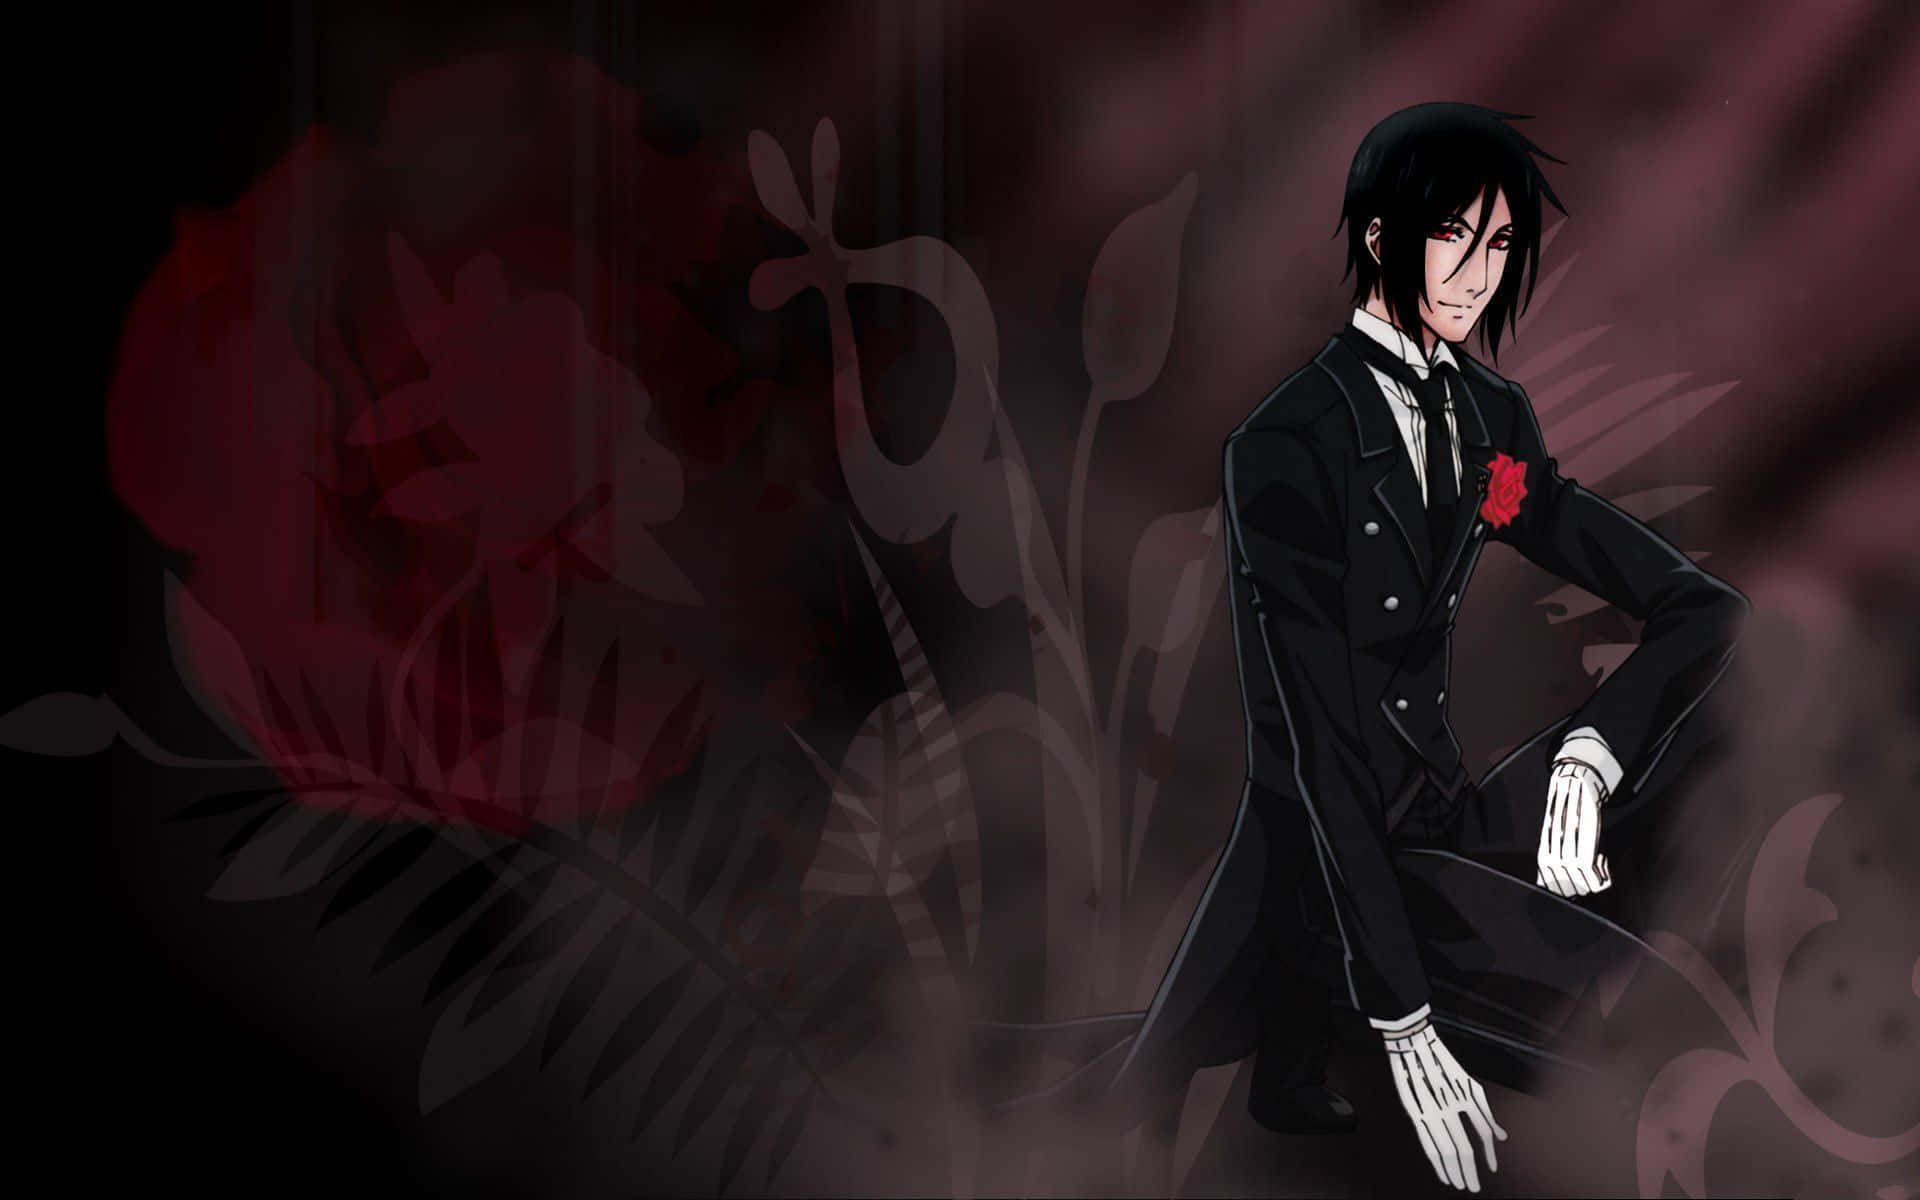 Become part of the supernatural world of Black Butler